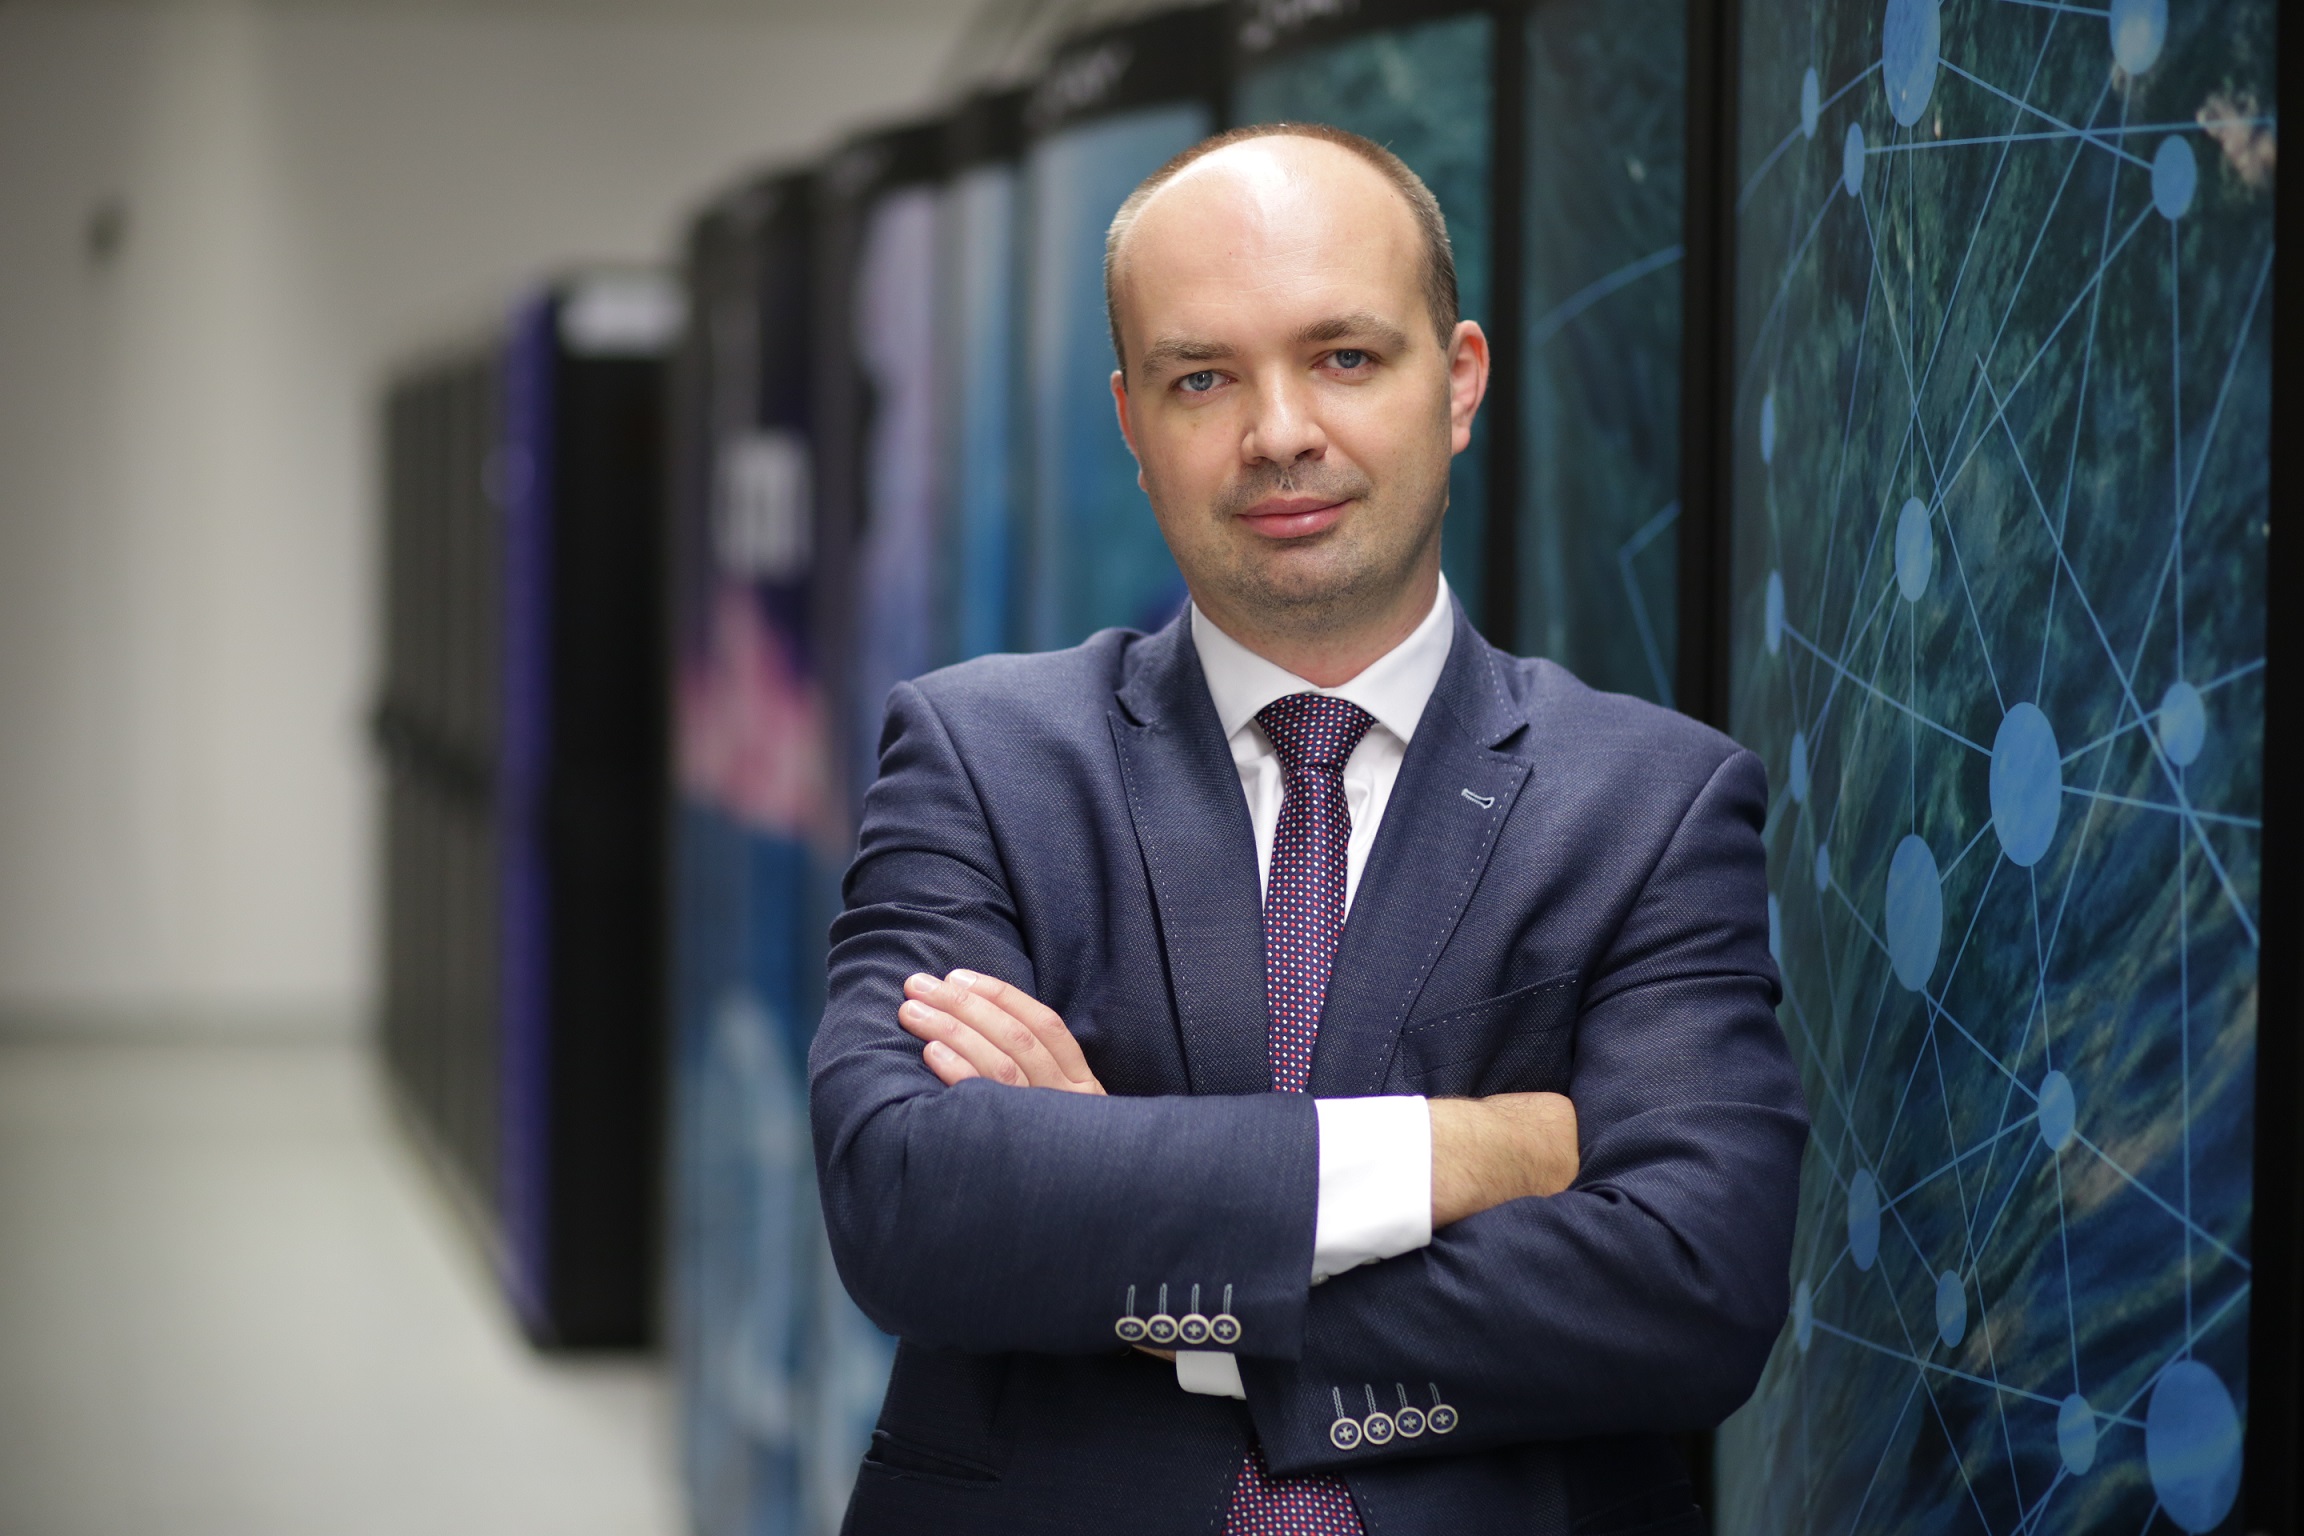 Dr. Robert Sot is the new Director of ICM University of Warsaw